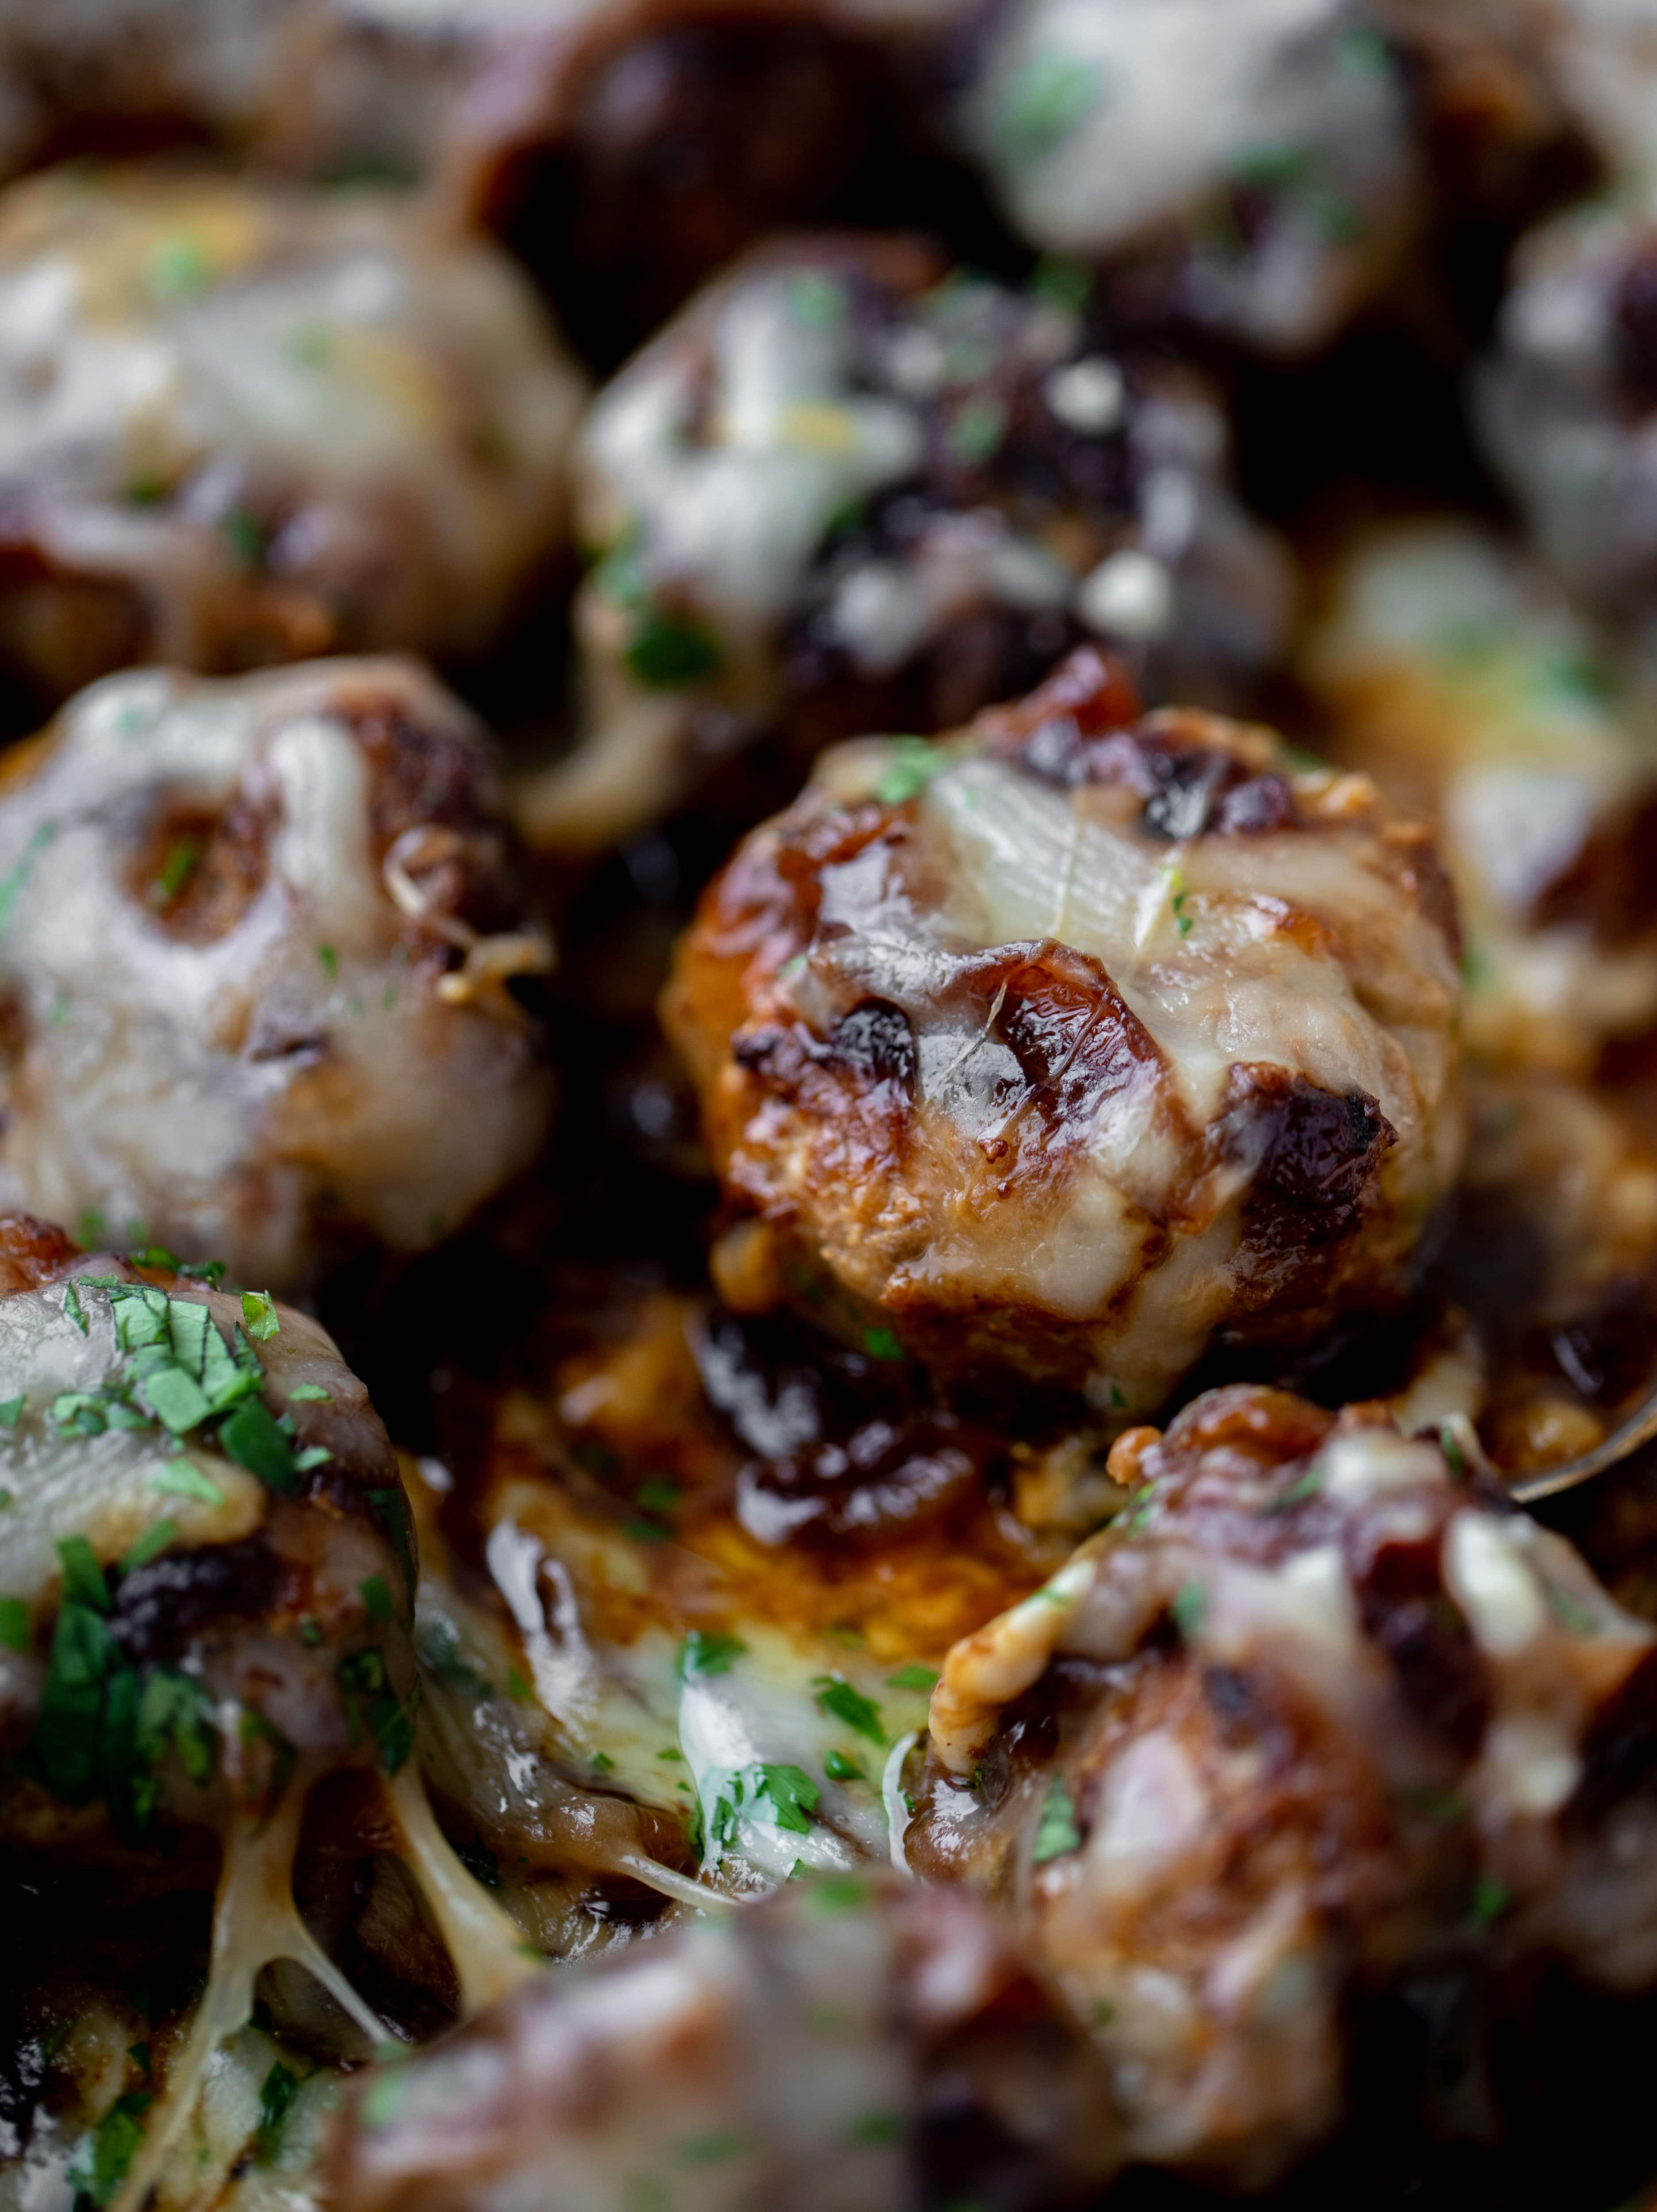 These french onion meatballs are super delicious! All the flavors of french onion soup made into juicy meatballs. Cheesy, saucy goodness!